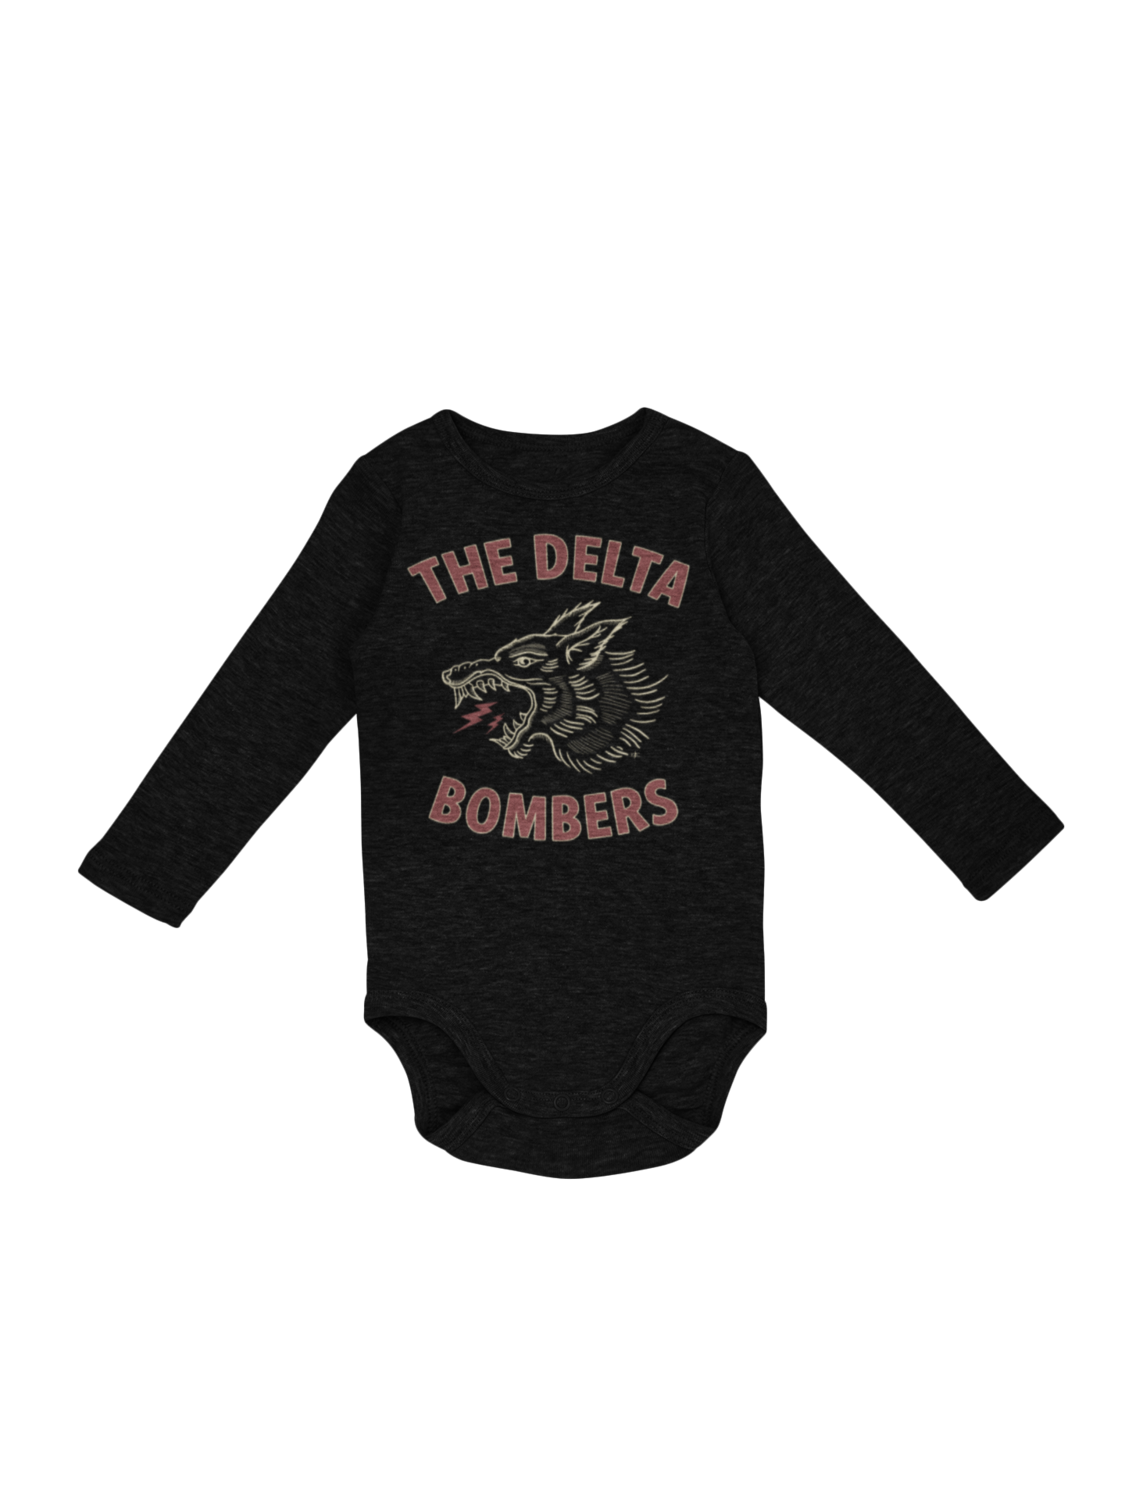 THE DELTA BOMBERS "Red Wolf" BABY ONIESE